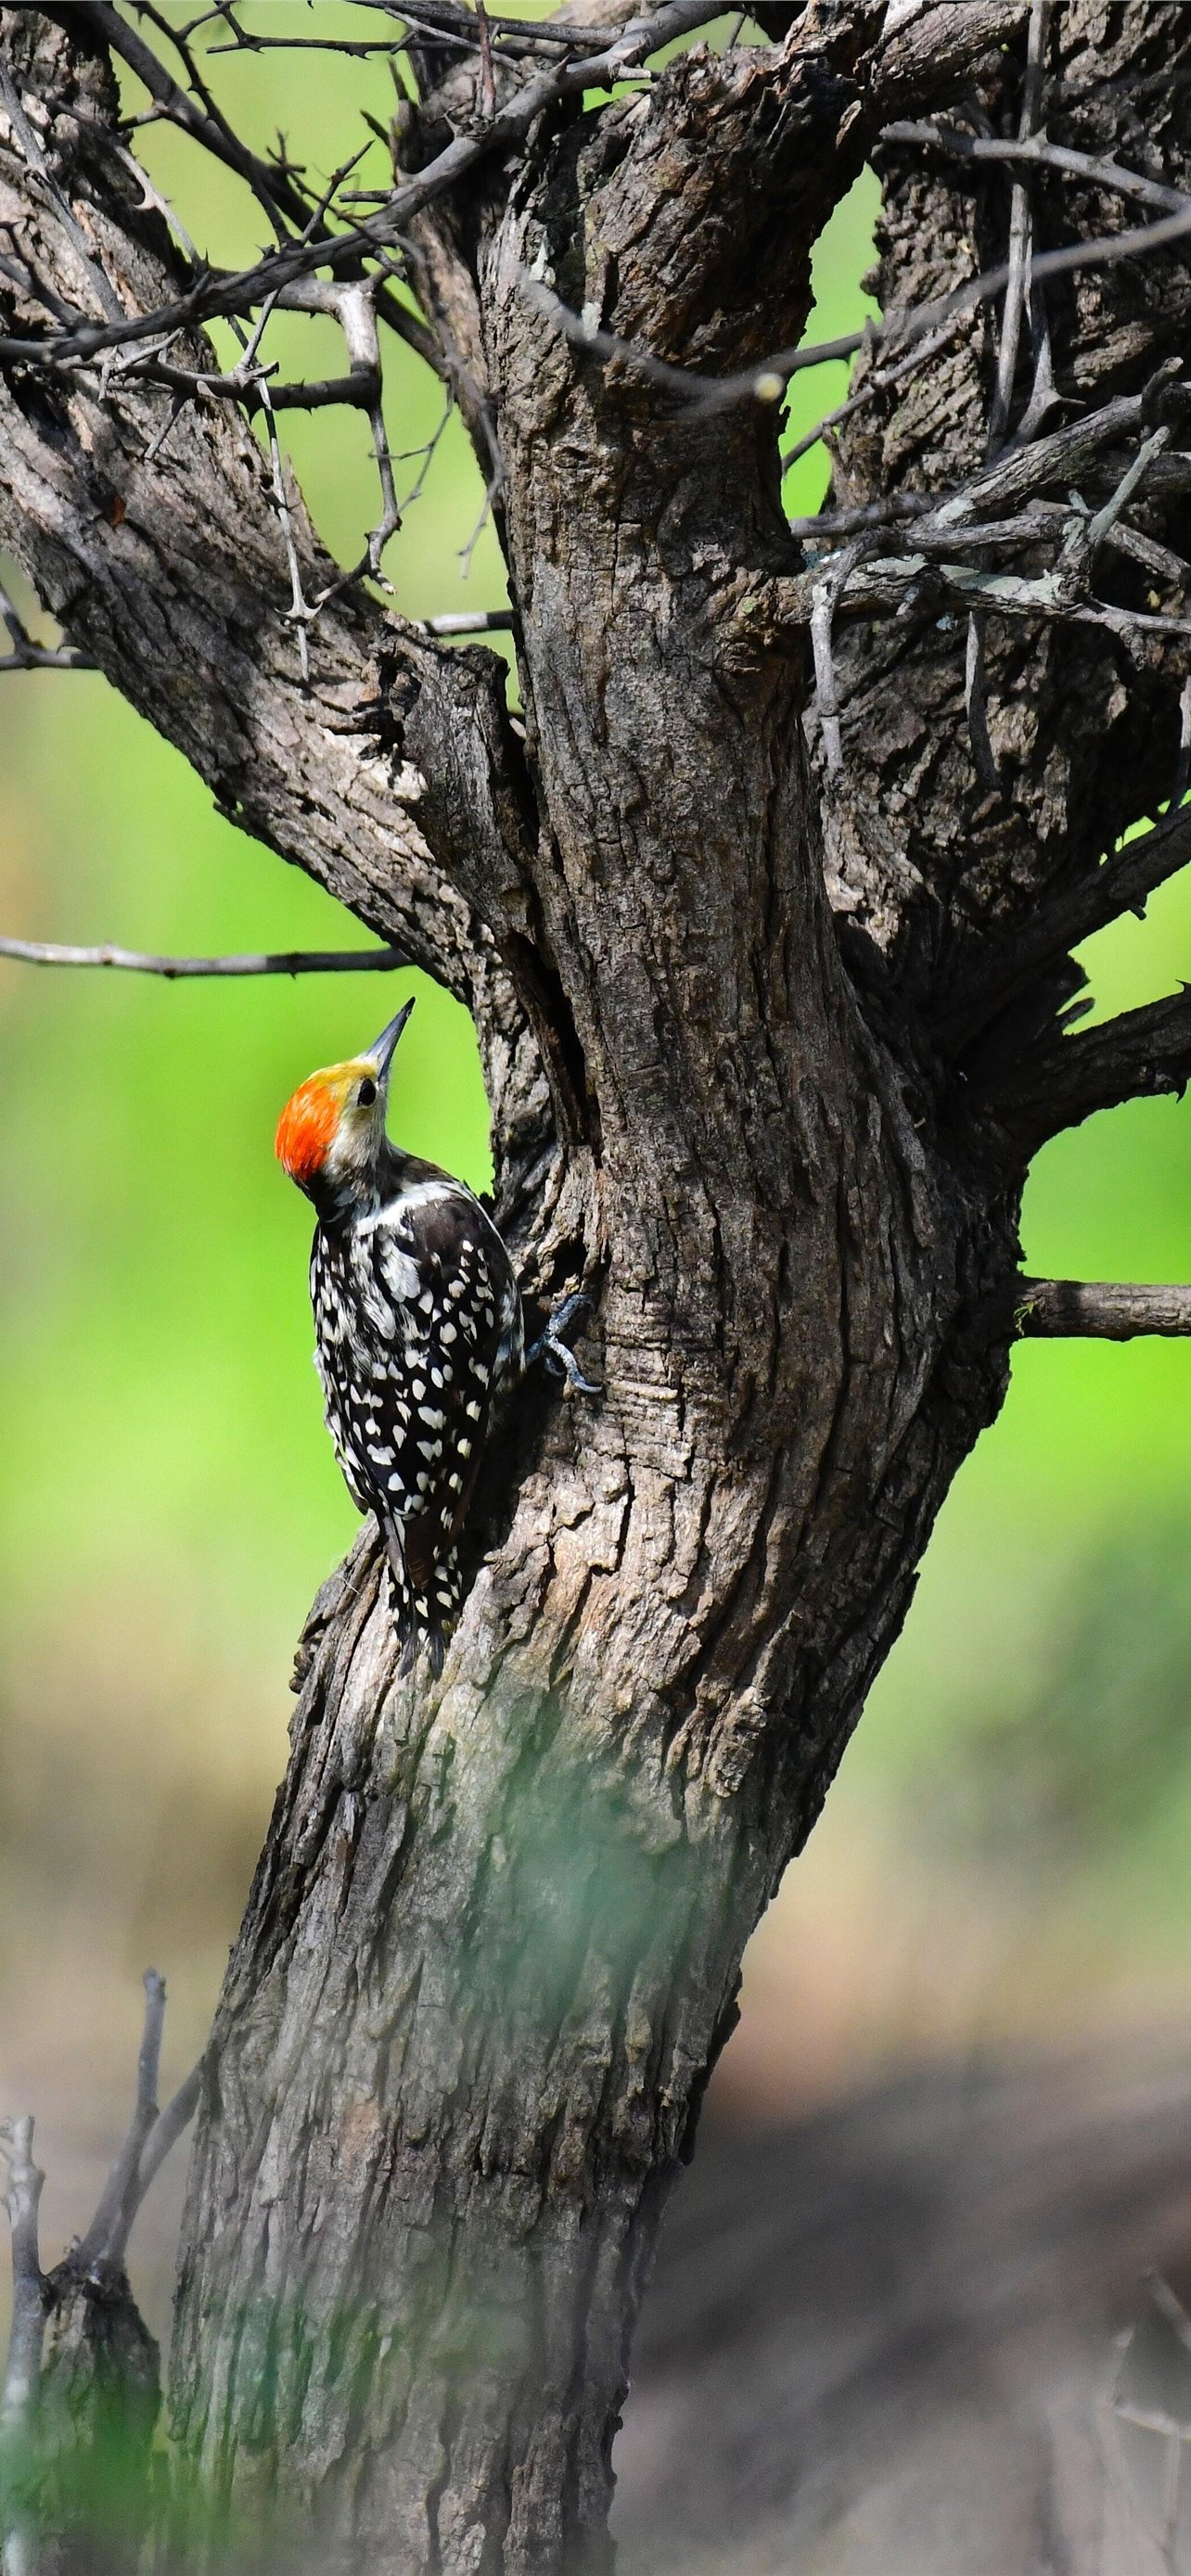 Woodpecker iPhone wallpapers, Mobile charm, Nature's wallpaper, Avian allure, 1290x2780 HD Phone